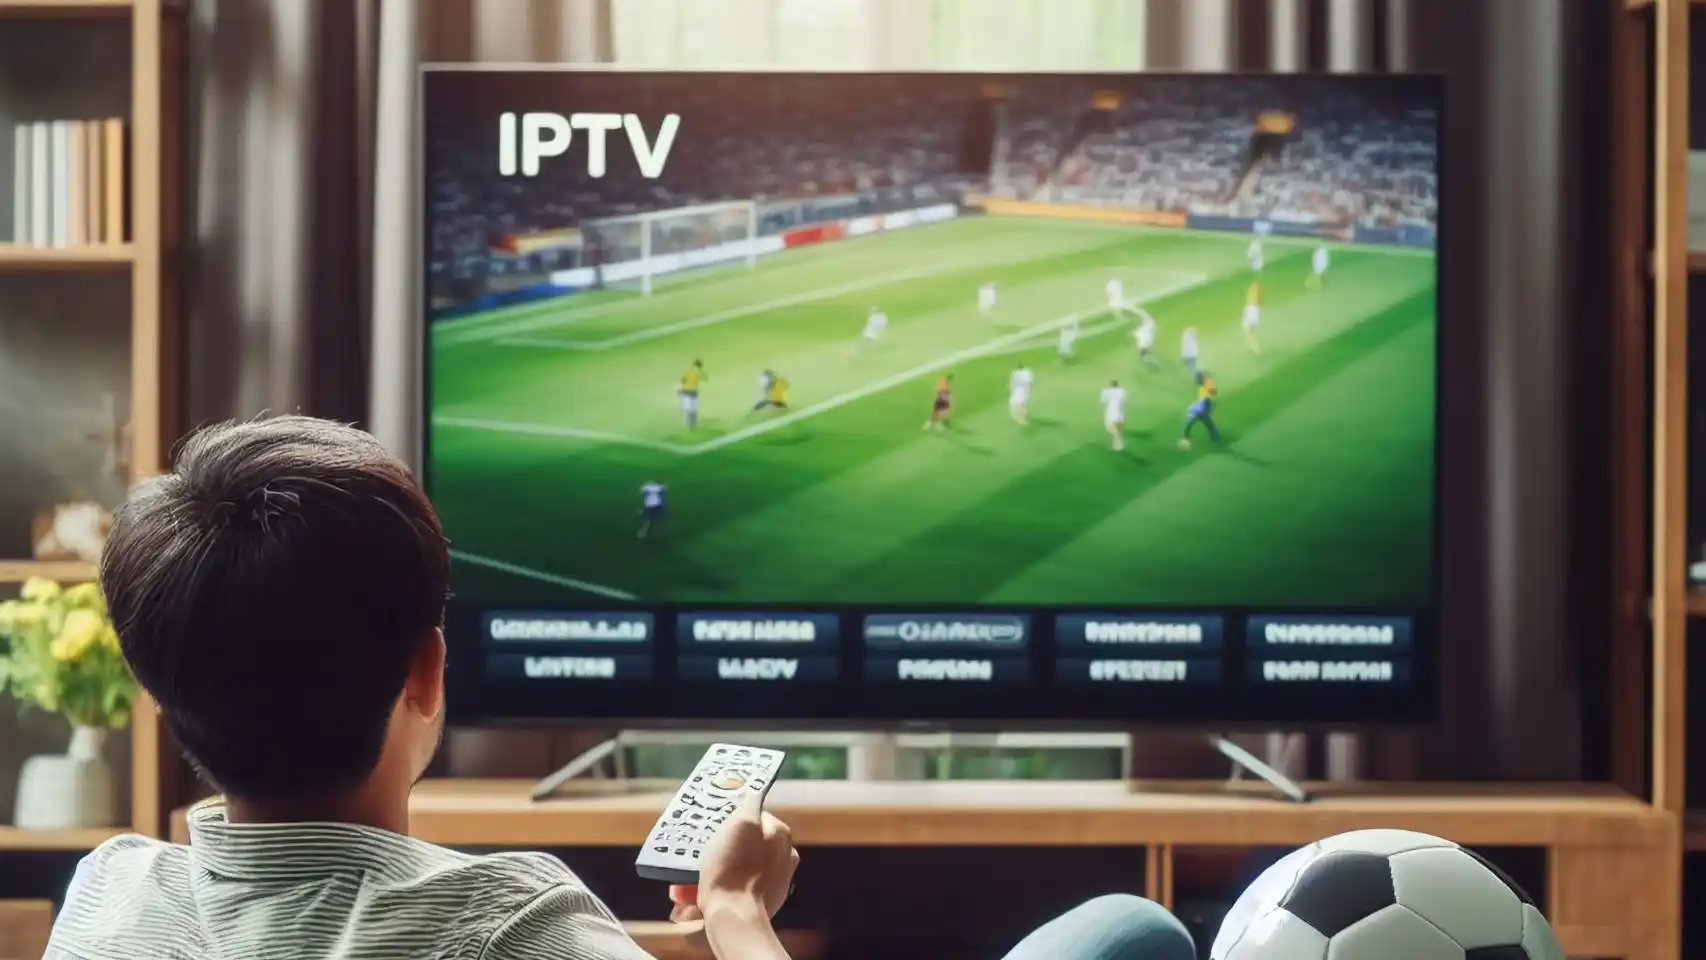 You are currently viewing 1 Listas IPTV Movistar Telegram